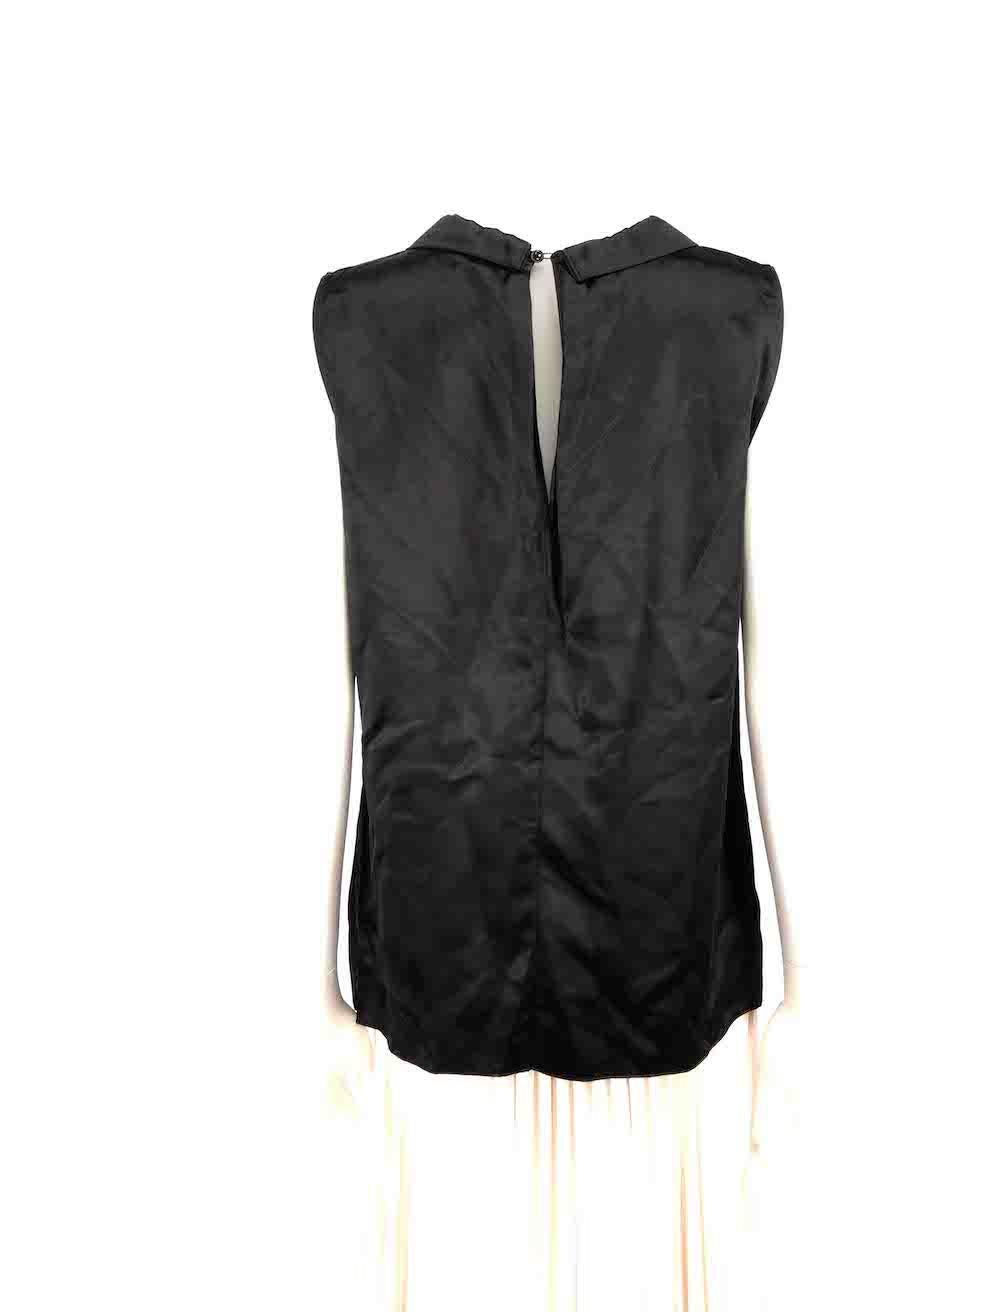 Marni Black Bow Accent Sleeveless Top Size L In Good Condition For Sale In London, GB